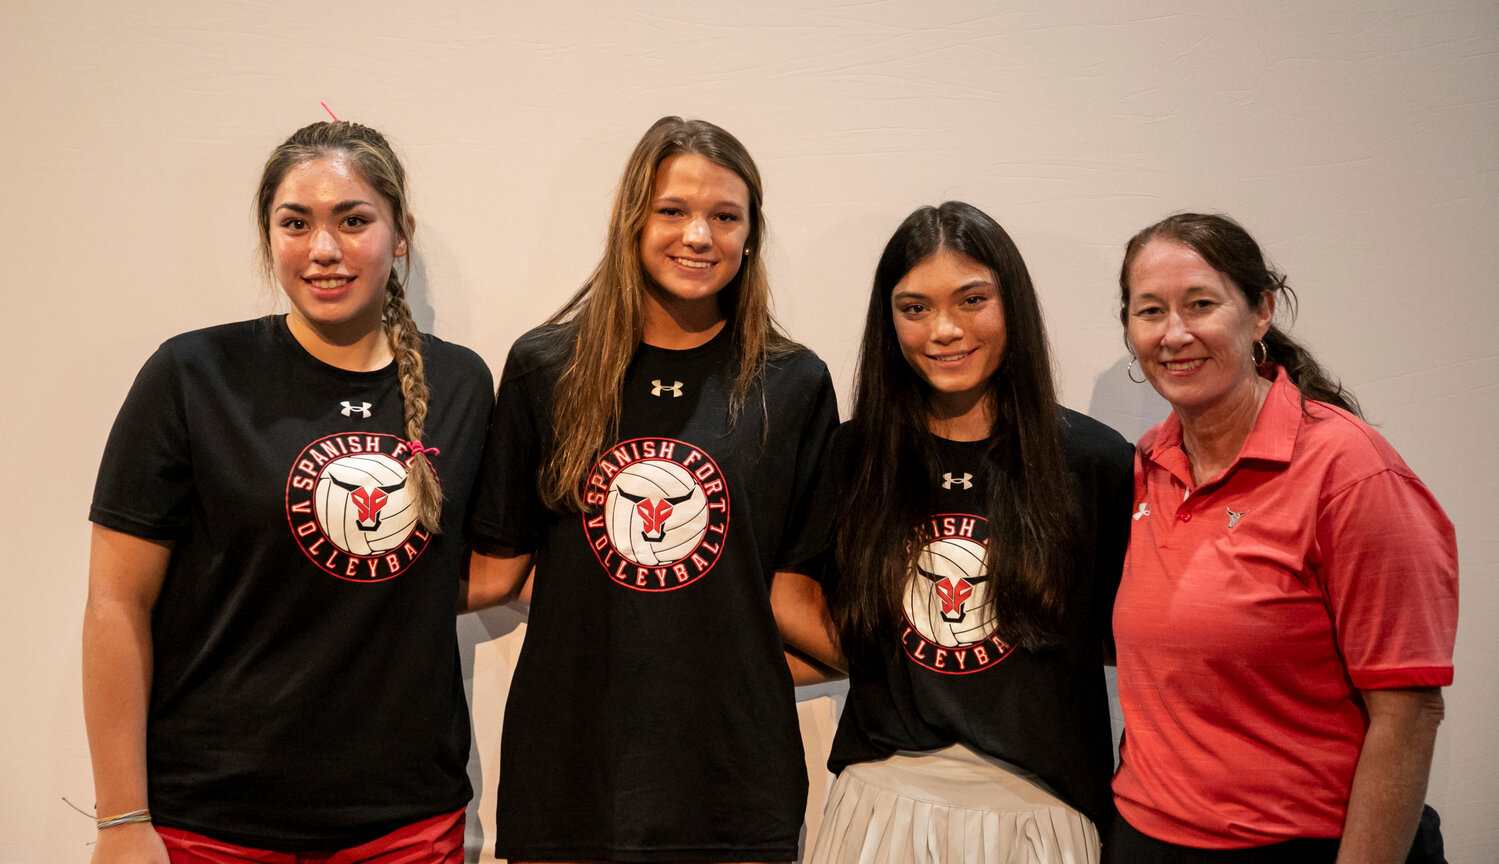 Spanish Fort’s Media Day representatives at Trojan Hall on Monday, Aug. 7, included Alexis Belarmino, Reece Varden, Mary Madison Lyles and head coach Gretchen Boykin. The Toros will look to construct a return trip to the state finals this season.